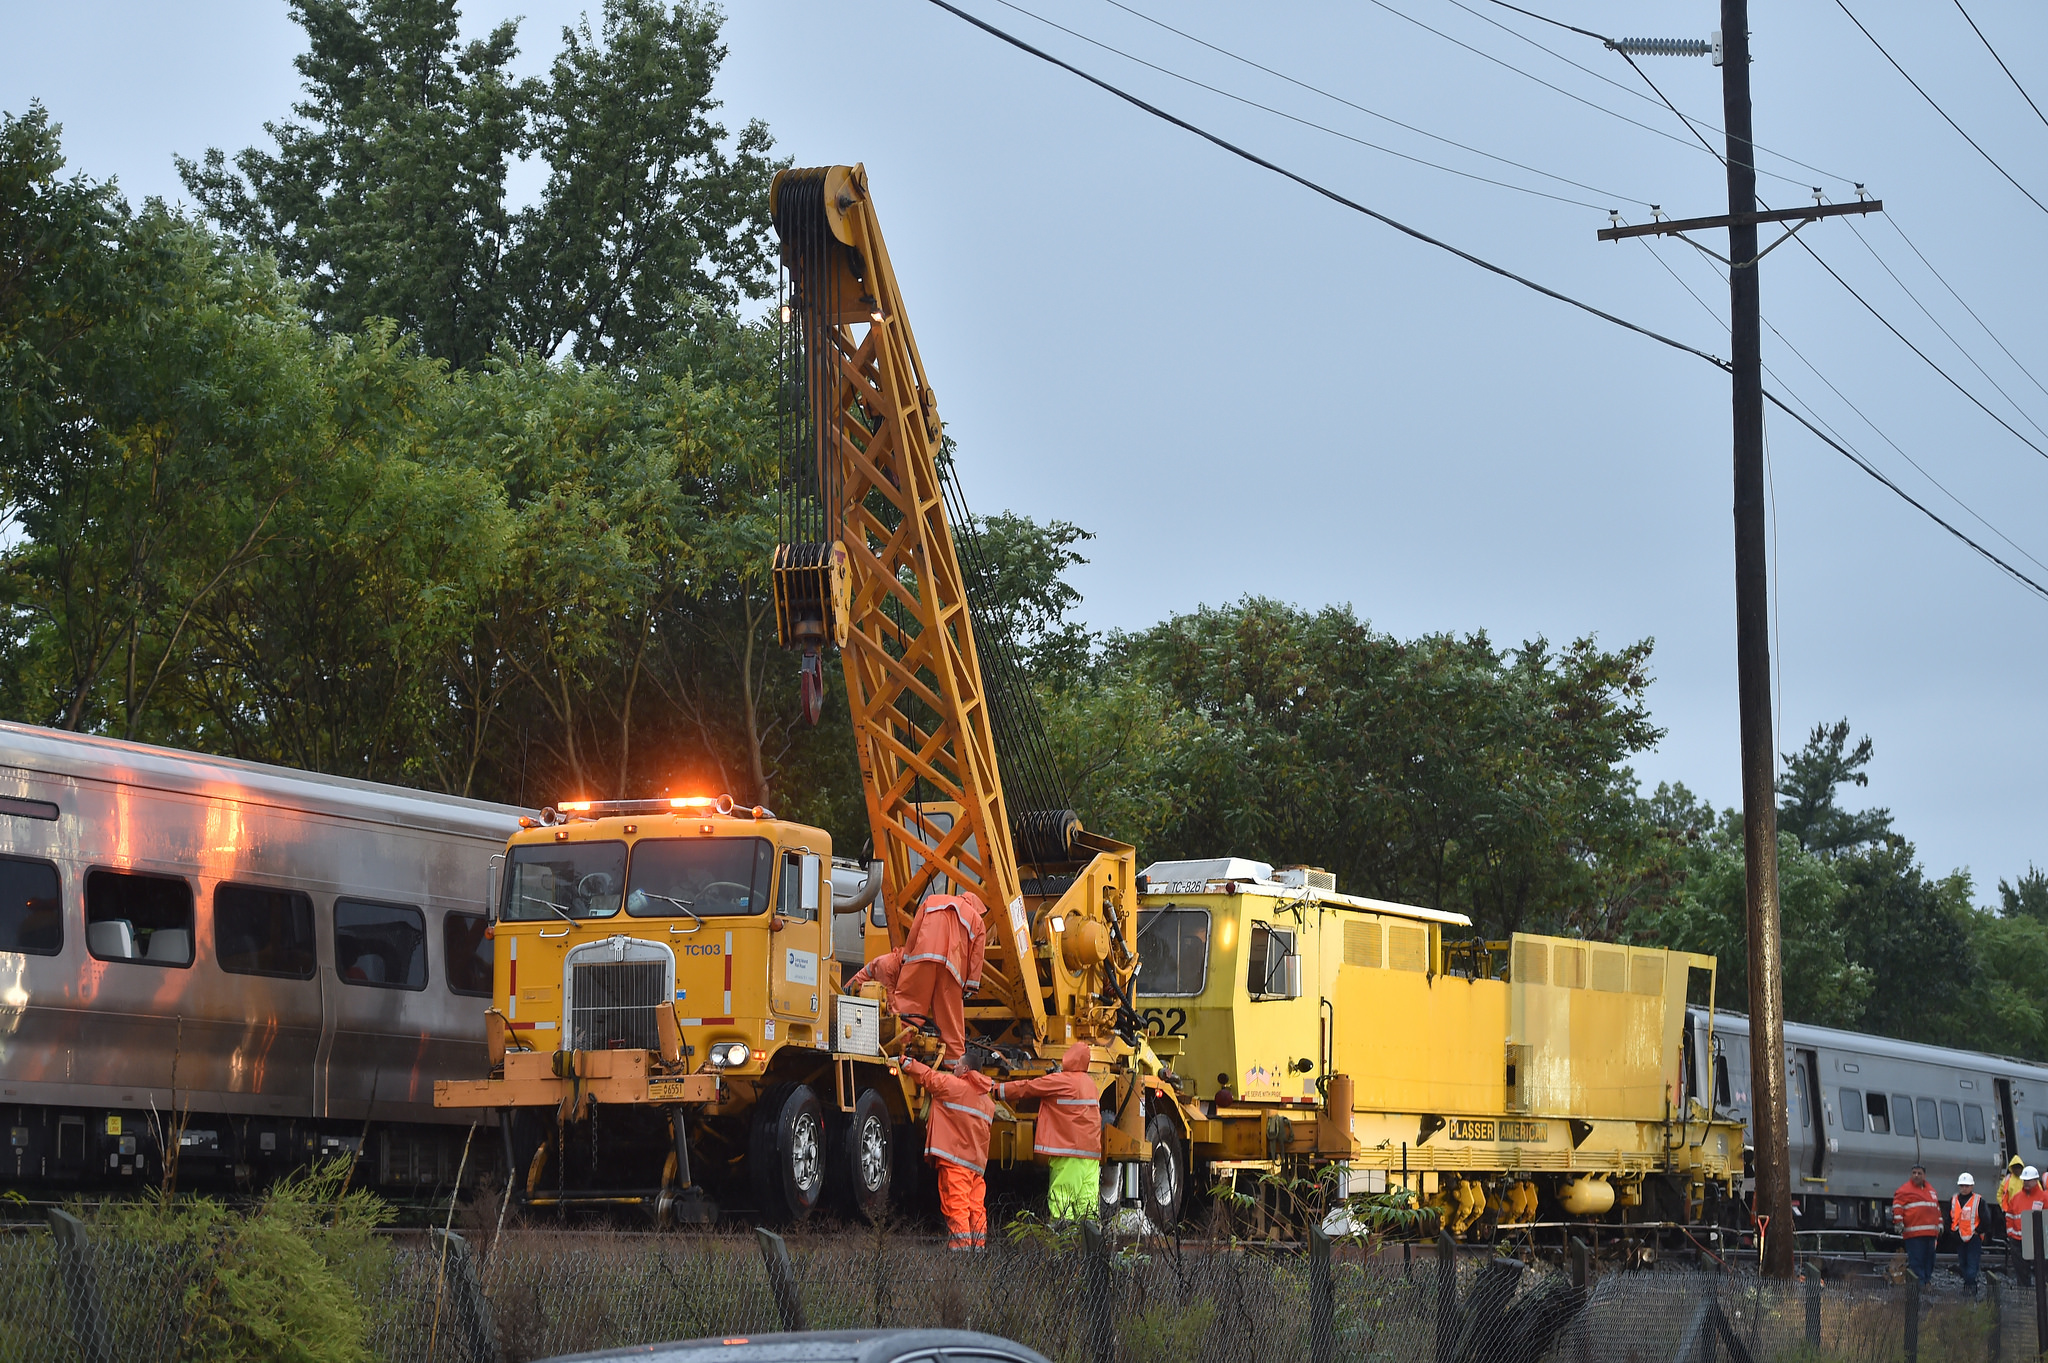 Crews work to clean up site of LIRR derailment on Saturday, Oct. 8, 2016 in New Hyde Park. (Photo credit: New York Governor's office) 